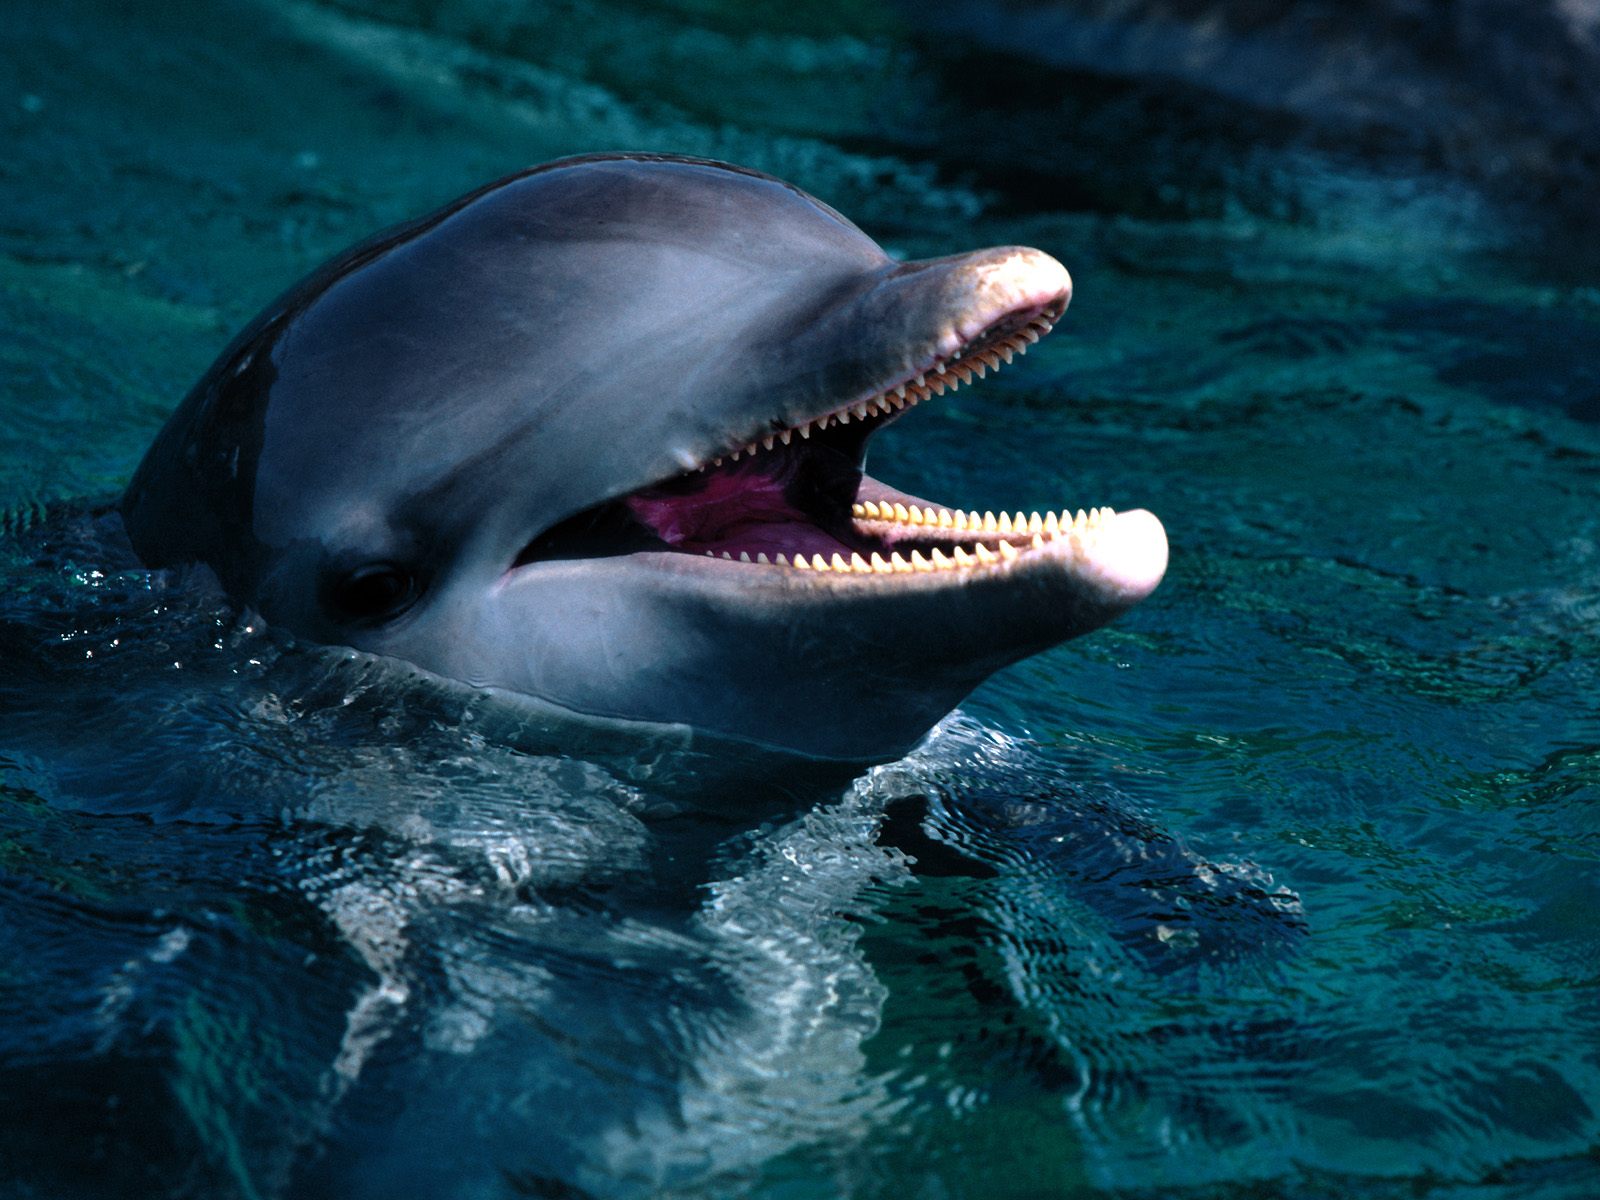 Dolphin Wallpaper Screensavers Pictures Videos And Site Seeing